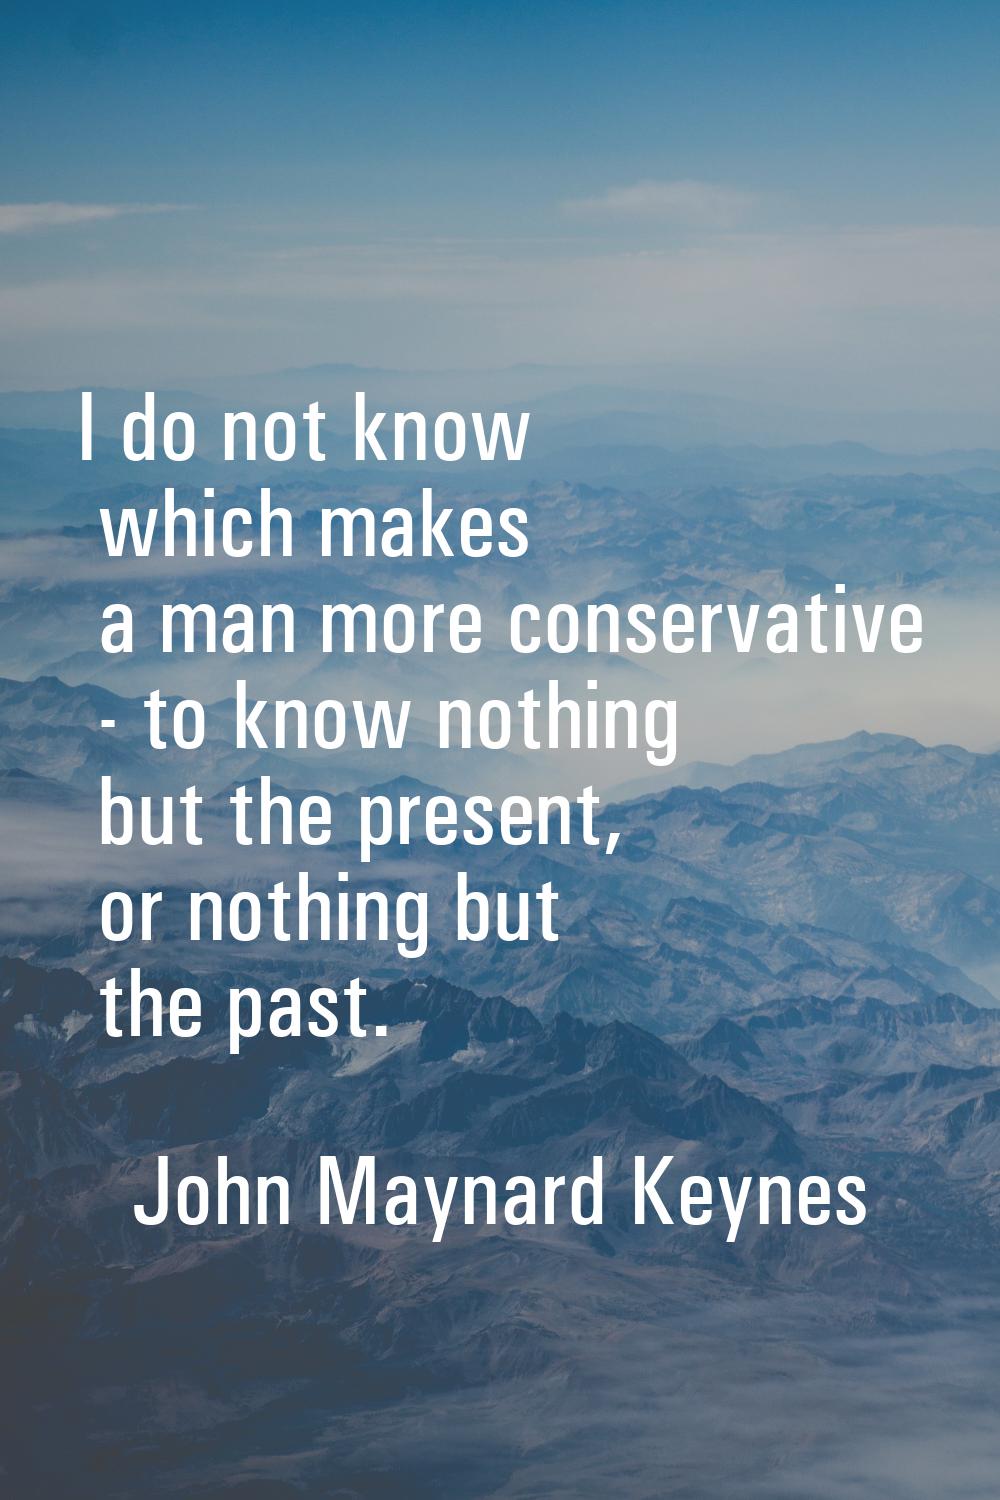 I do not know which makes a man more conservative - to know nothing but the present, or nothing but